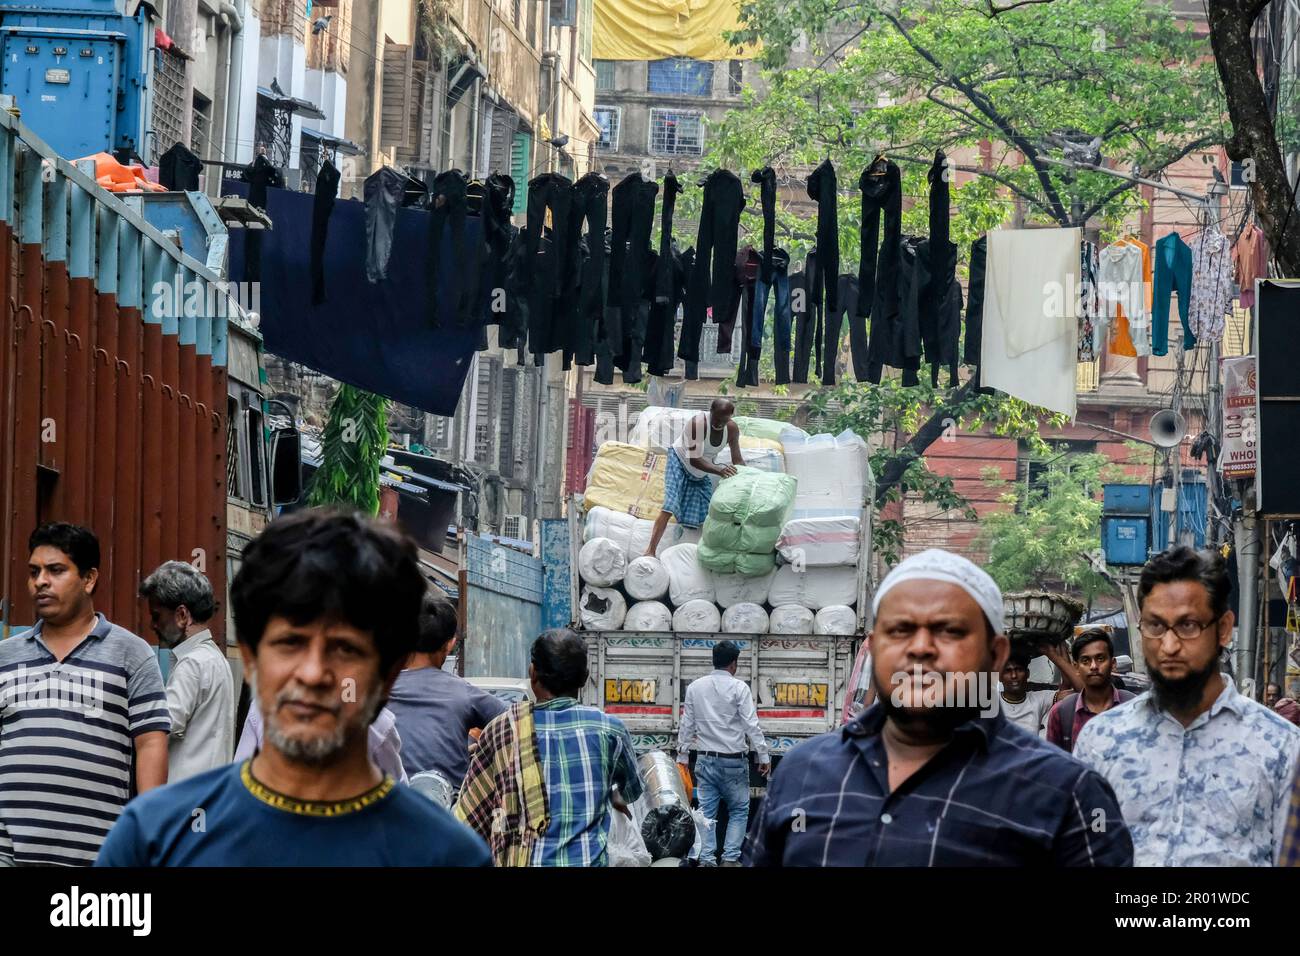 https://c8.alamy.com/comp/2R01WDC/kolkata-india-22nd-mar-2023-people-walk-on-a-busy-street-in-kolkata-while-pants-are-being-hanged-above-the-street-for-drying-purposes-credit-image-dipayan-bosesopa-images-via-zuma-press-wire-editorial-usage-only!-not-for-commercial-usage!-2R01WDC.jpg